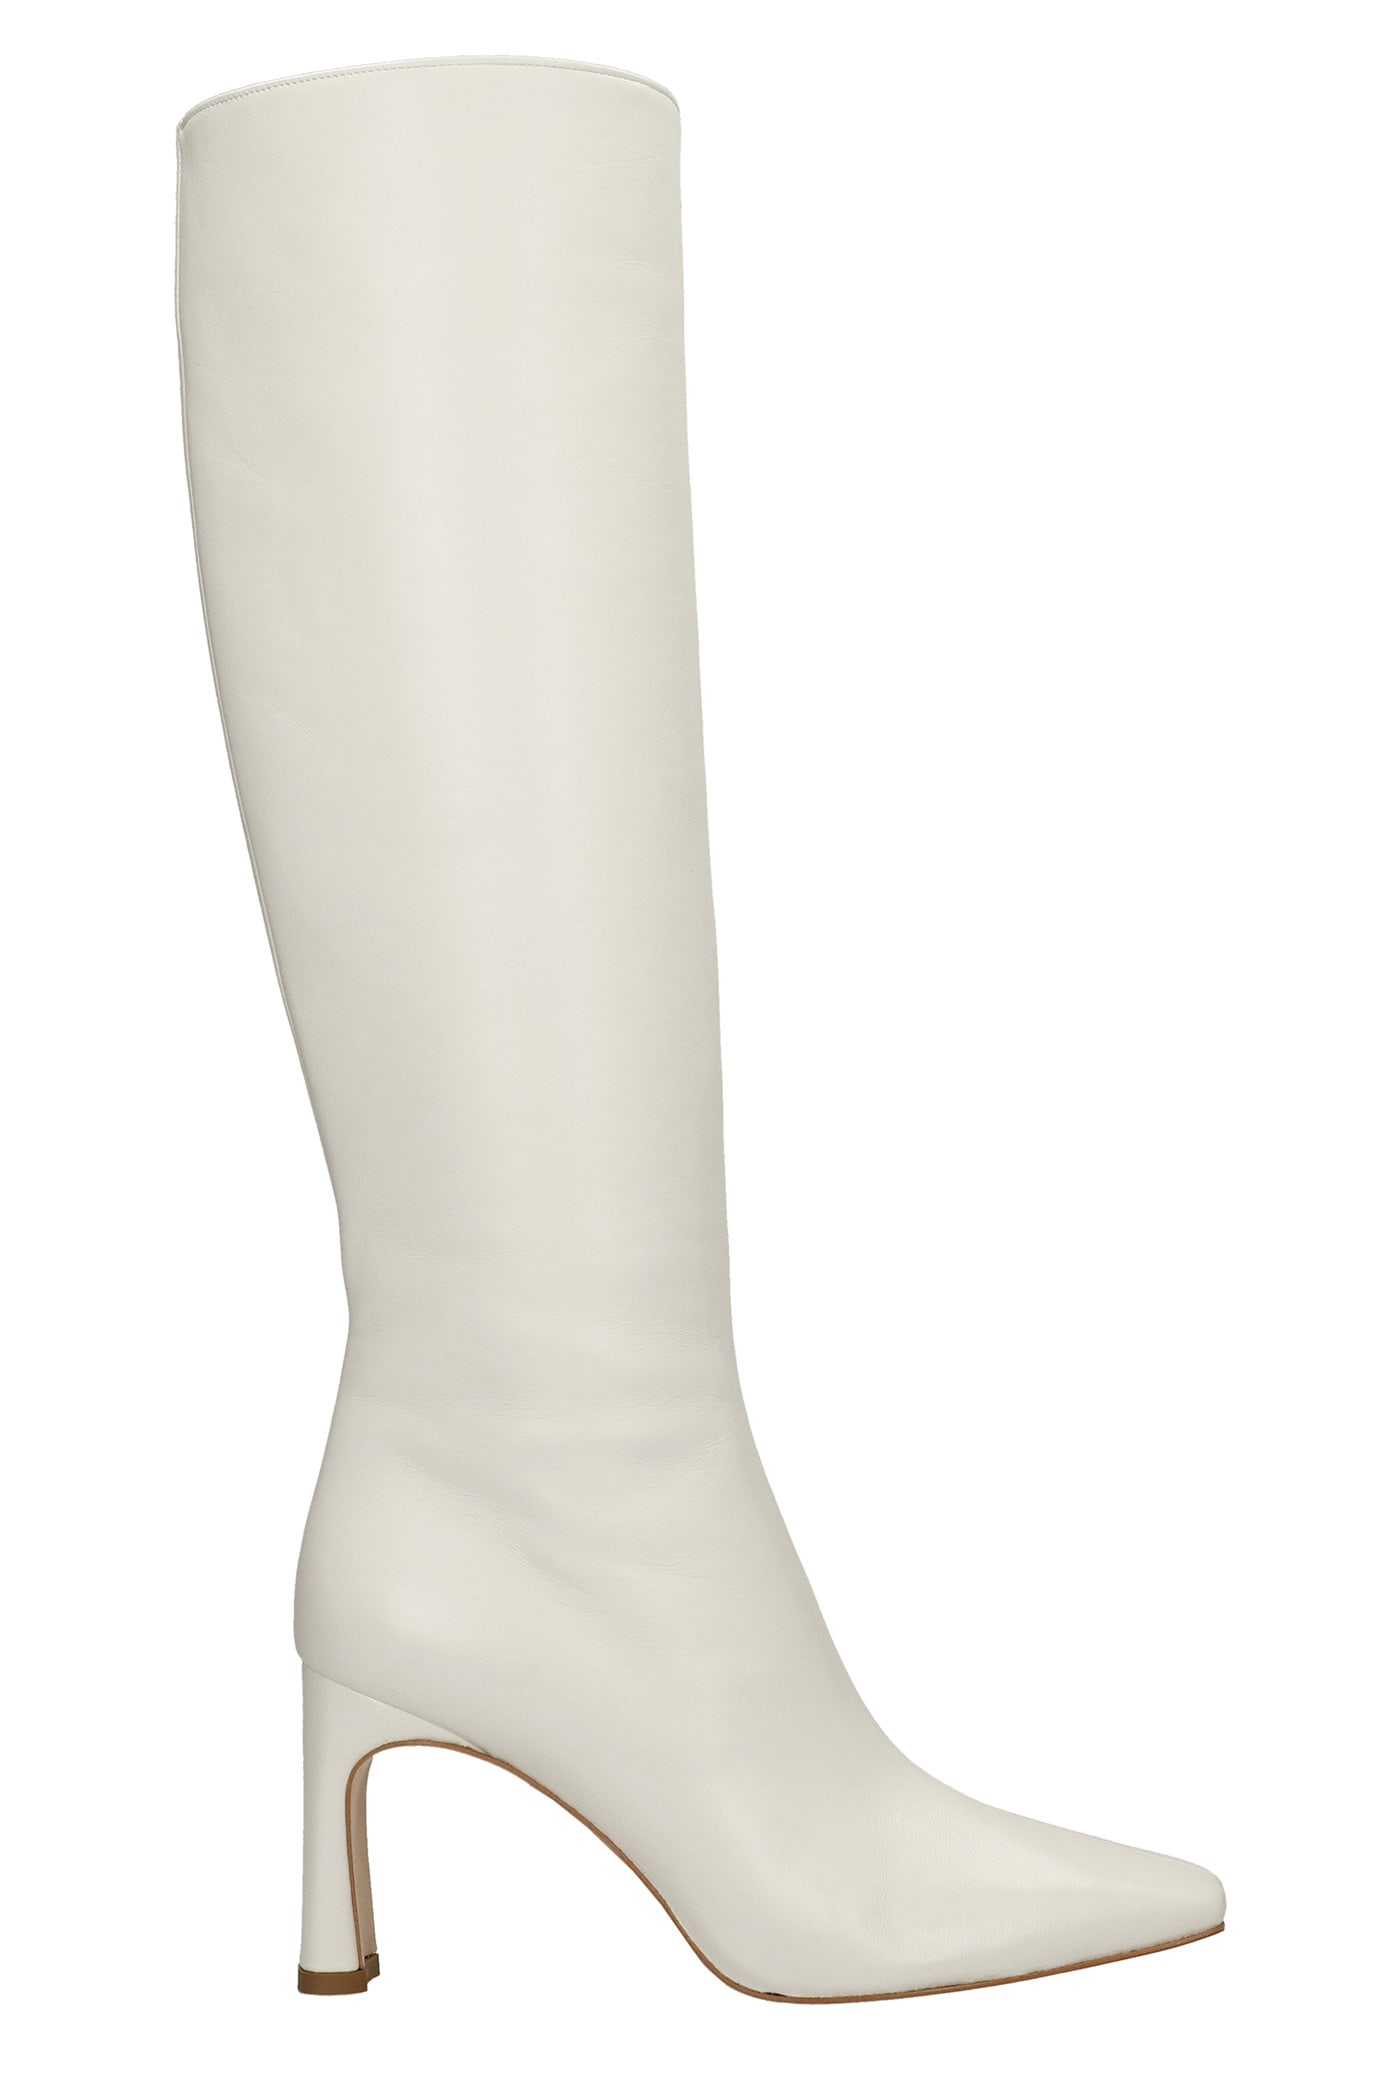 Liu-Jo Squared Lh01 High Heels Boots In White Leather